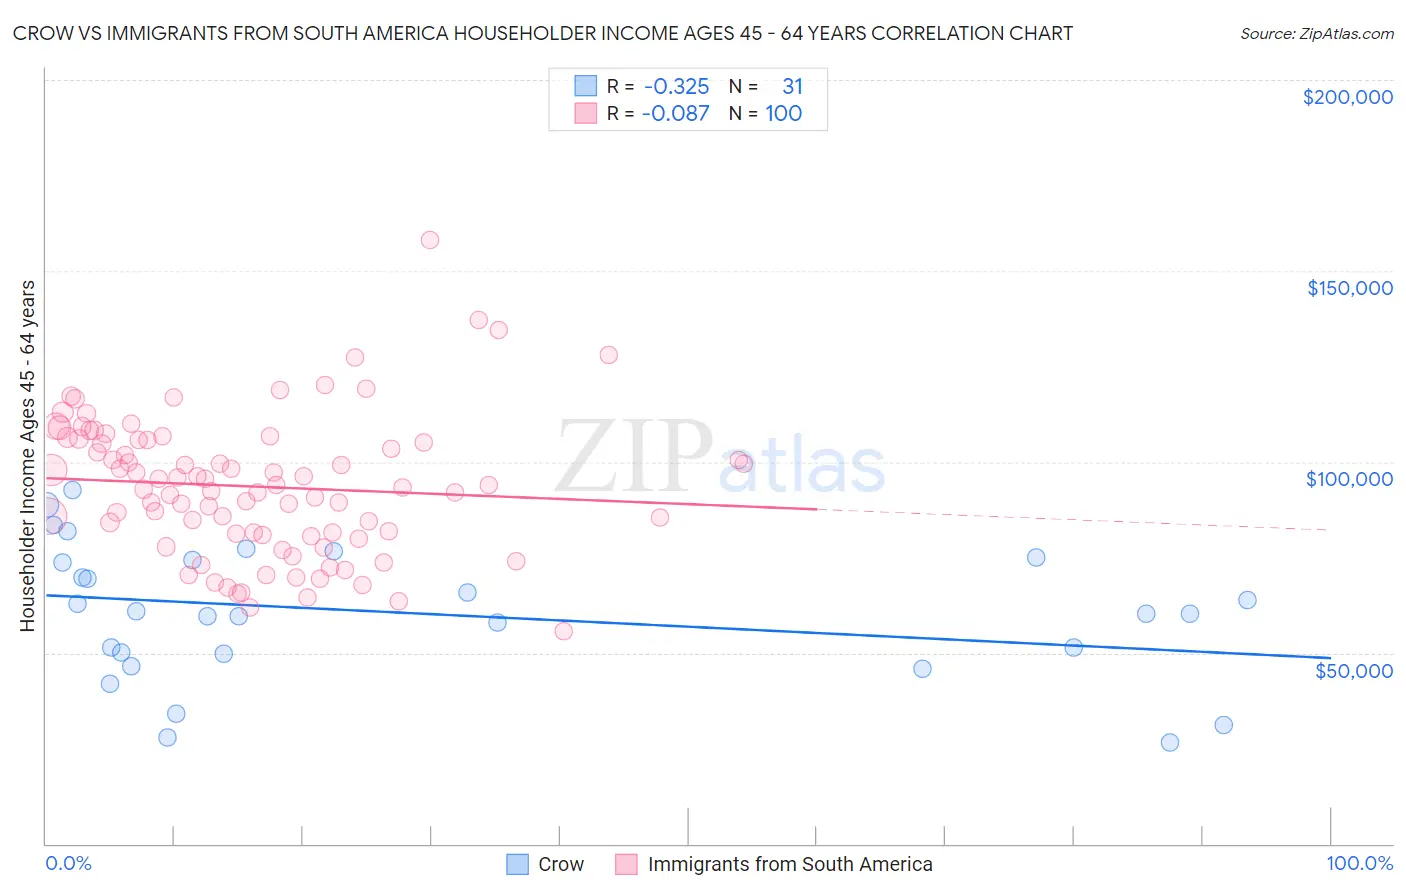 Crow vs Immigrants from South America Householder Income Ages 45 - 64 years